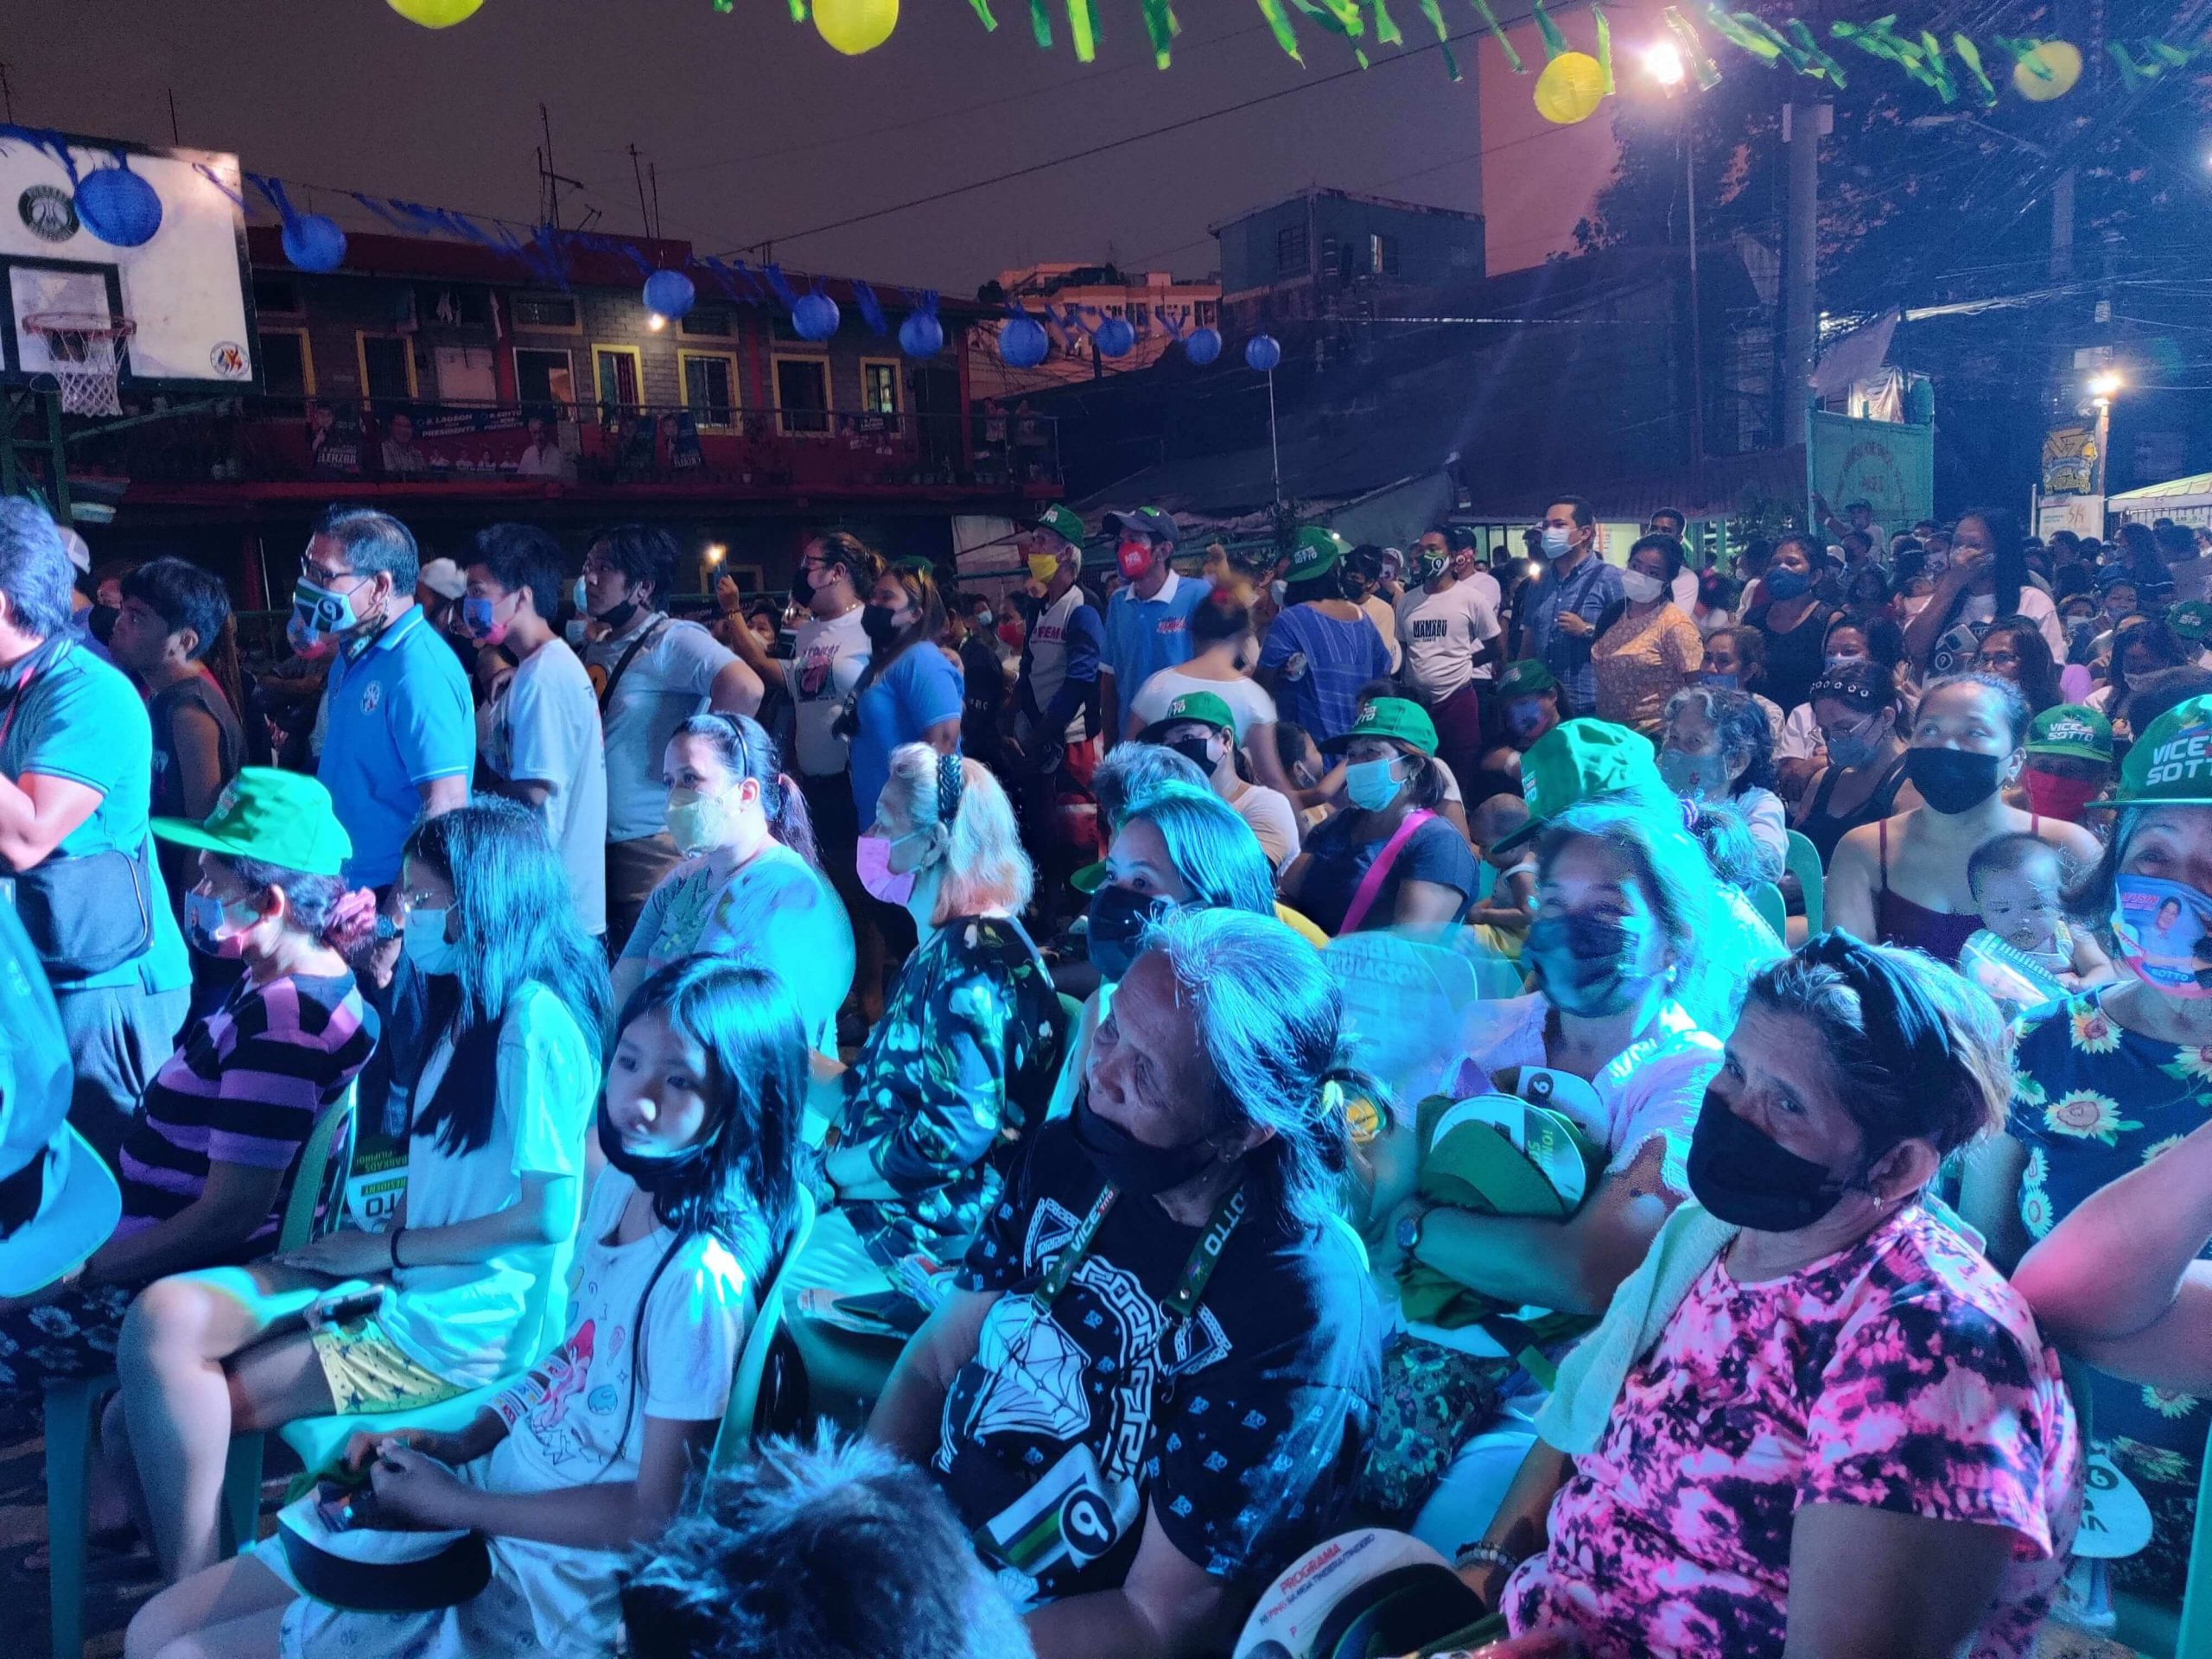 The meeting in Malibay, Pasay City, started late afternoon and continued up to the evening. The people stayed on and listened to presidential candidate Ping Lacson and his running mate Tito Sotto. Photo by Enrico Berdos/VERA Files